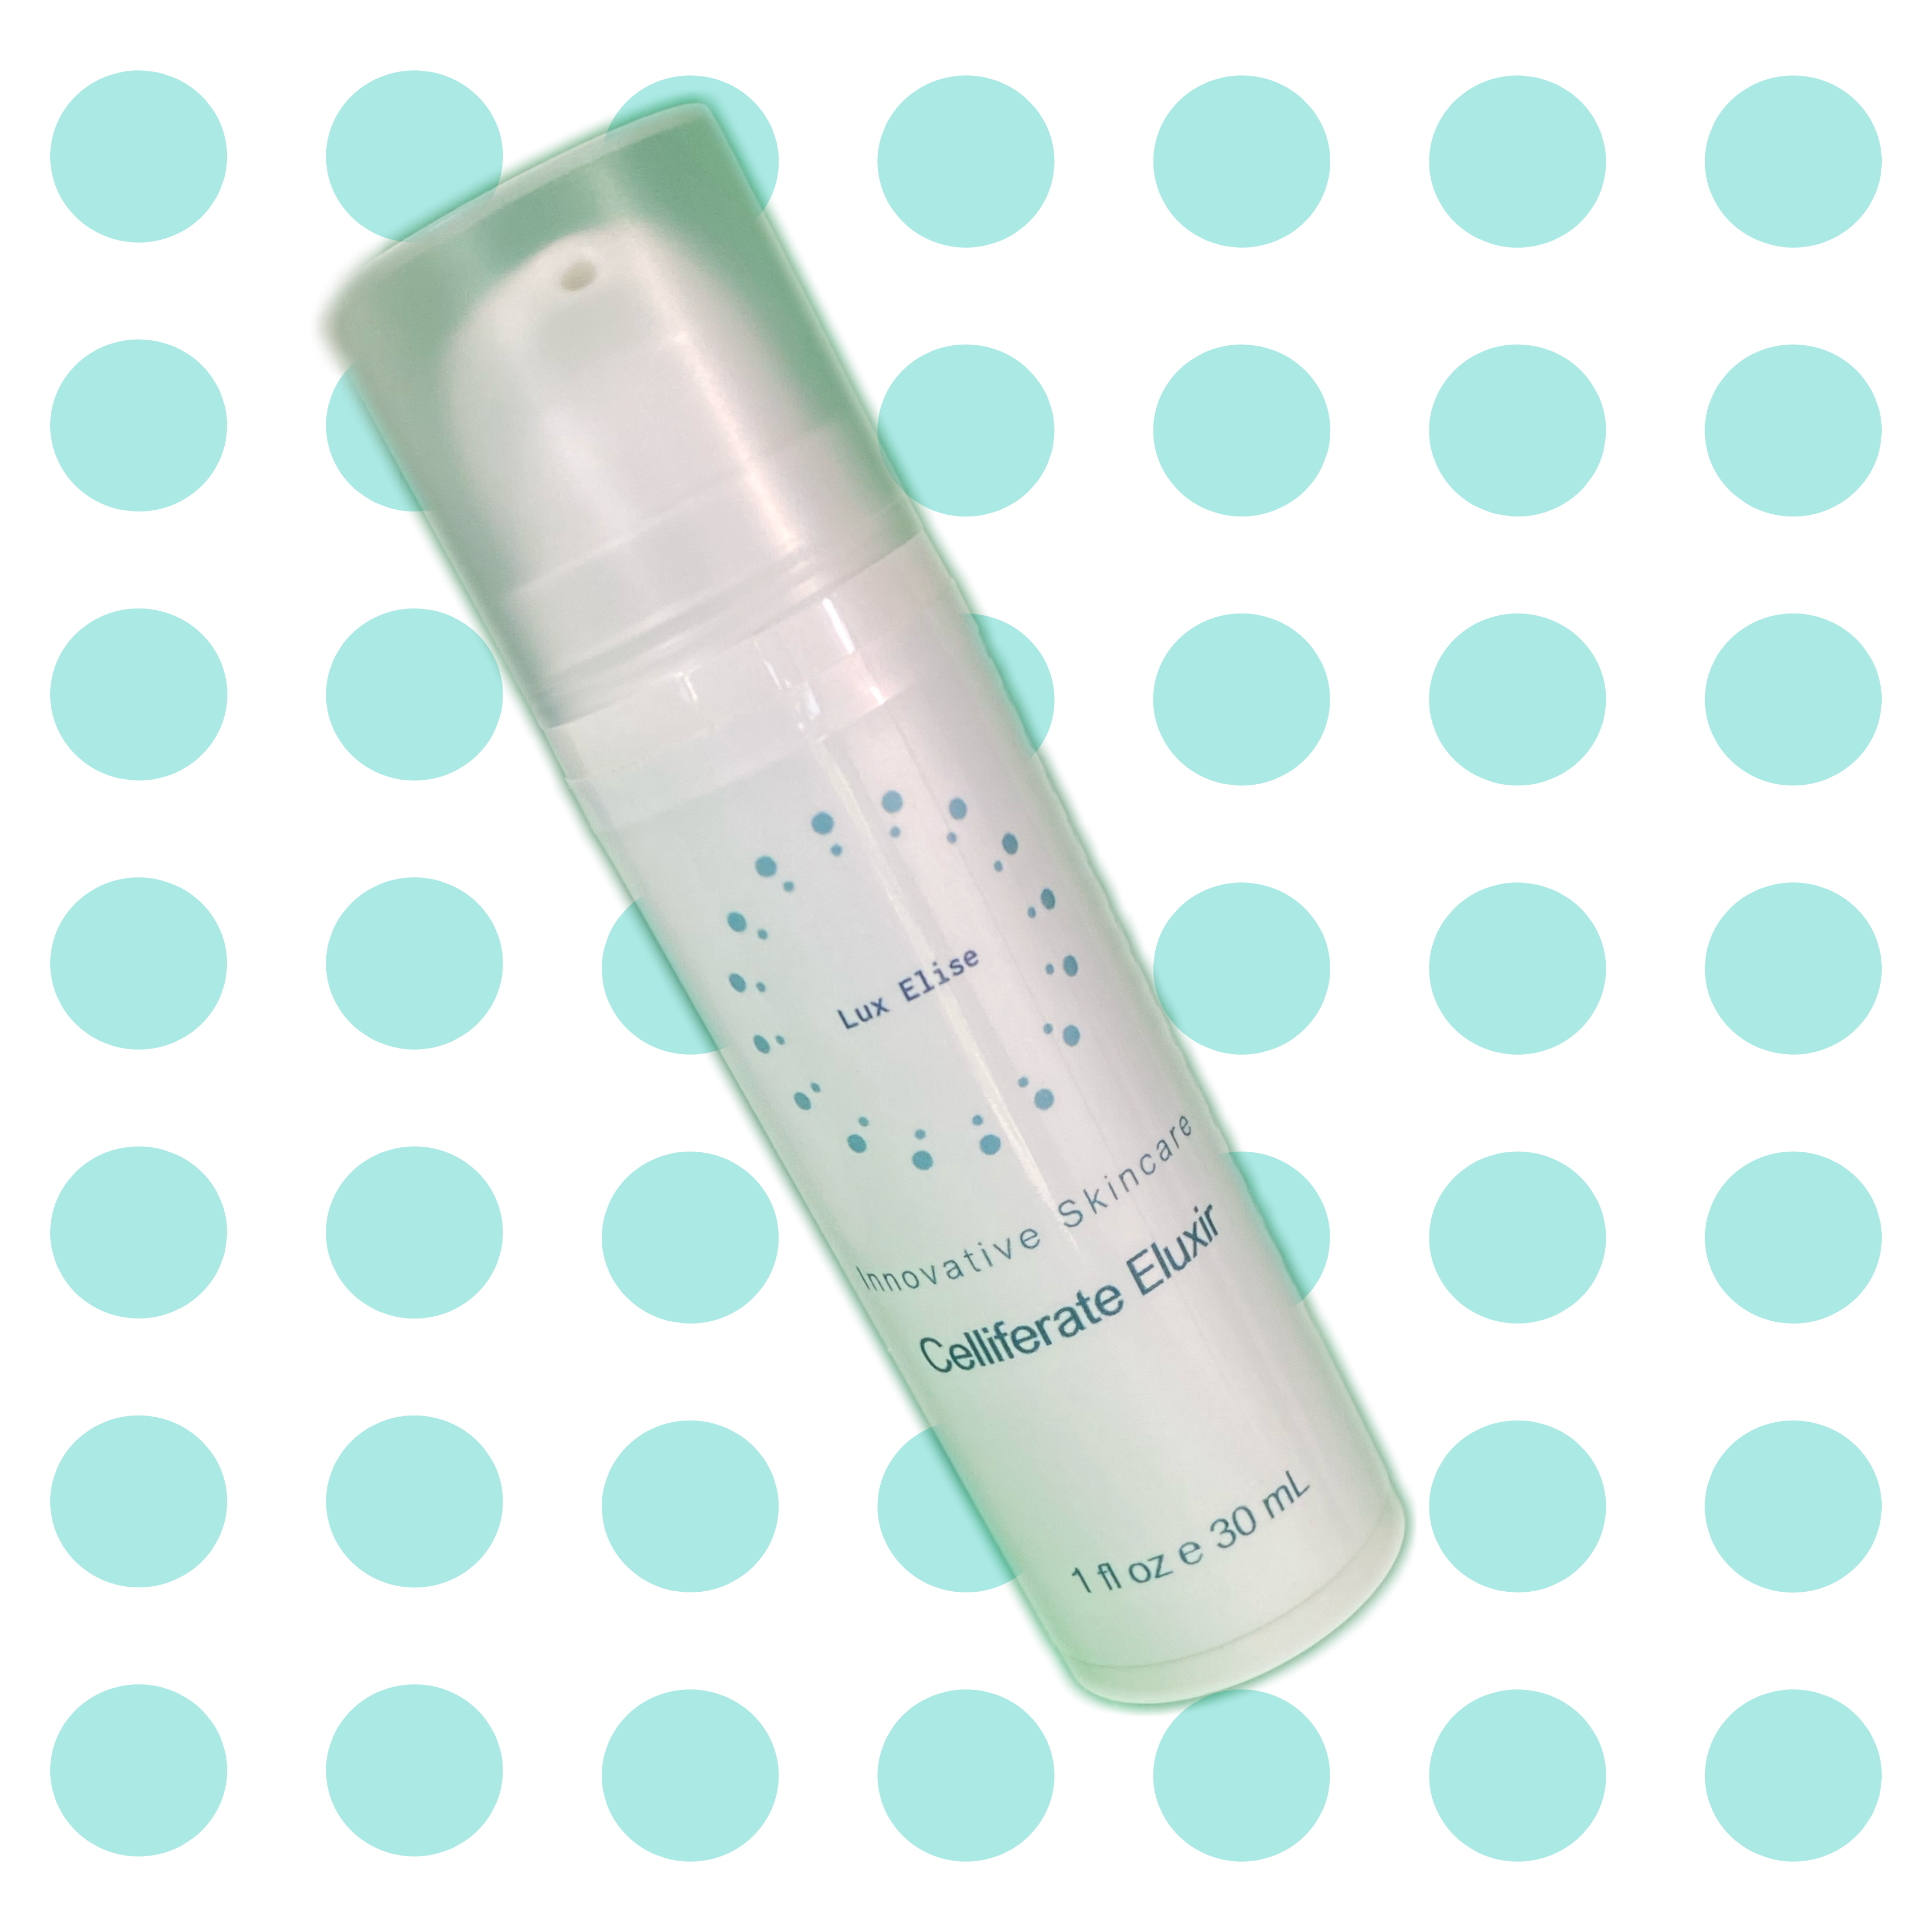 Lux Elise Celliferate Eluxir - lightweight, calming hydration - Lux Elise lumion serum dupe tower 28 glow honest skincare best